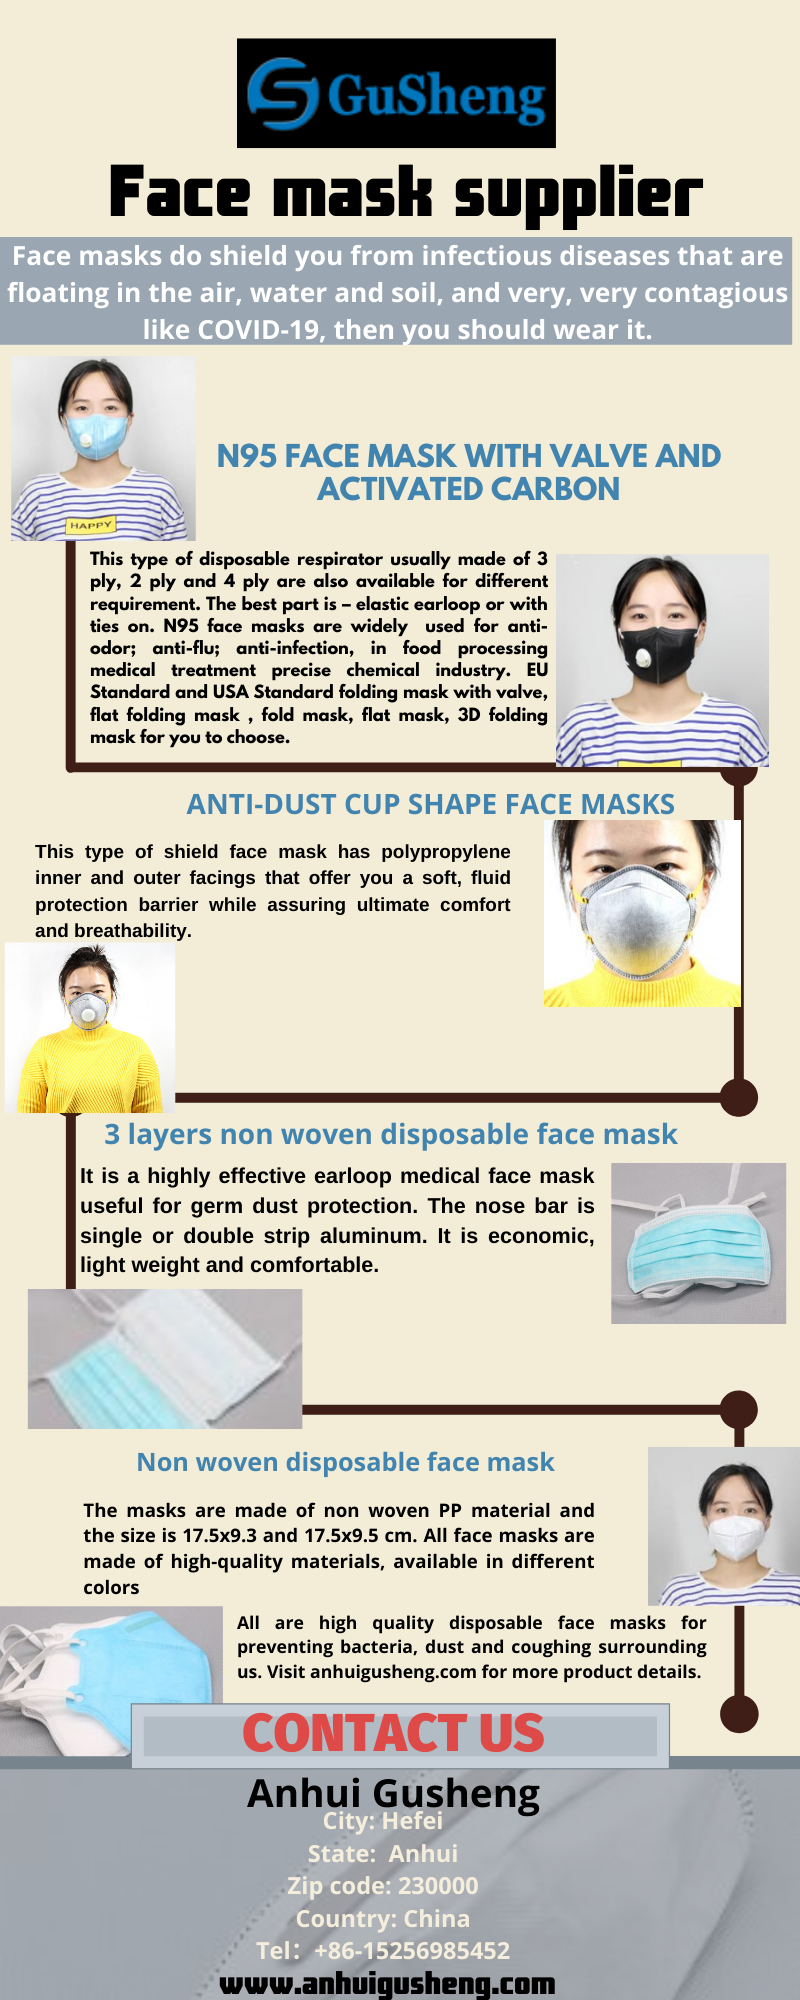 Face mask supplier.png  by Anhuigusheng